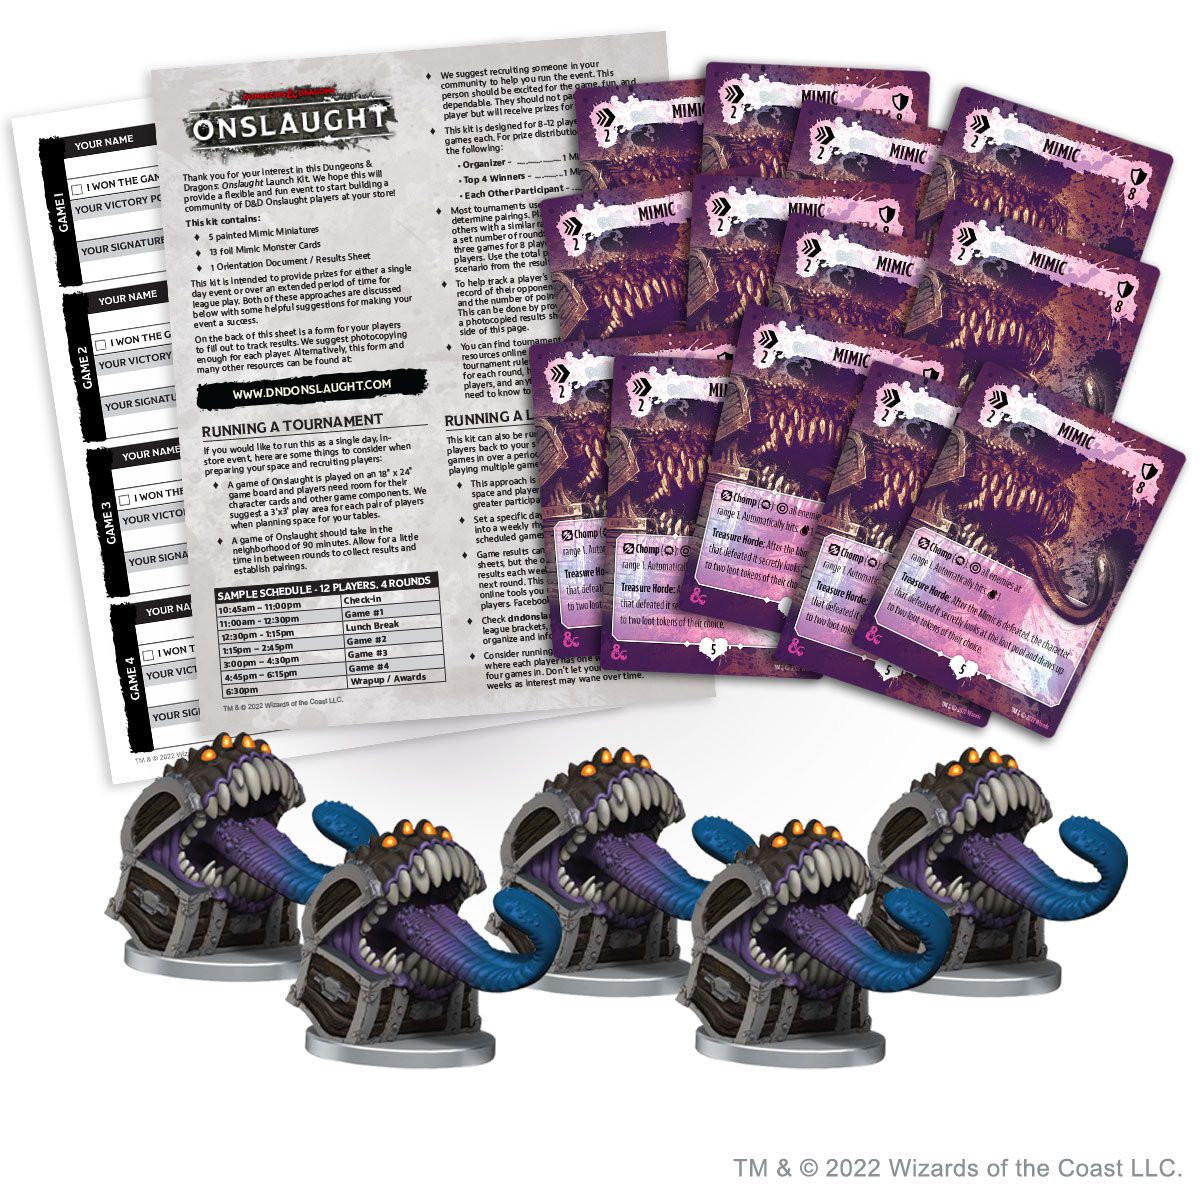 Dungeons & Dragons: Onslaught OP Kit contents